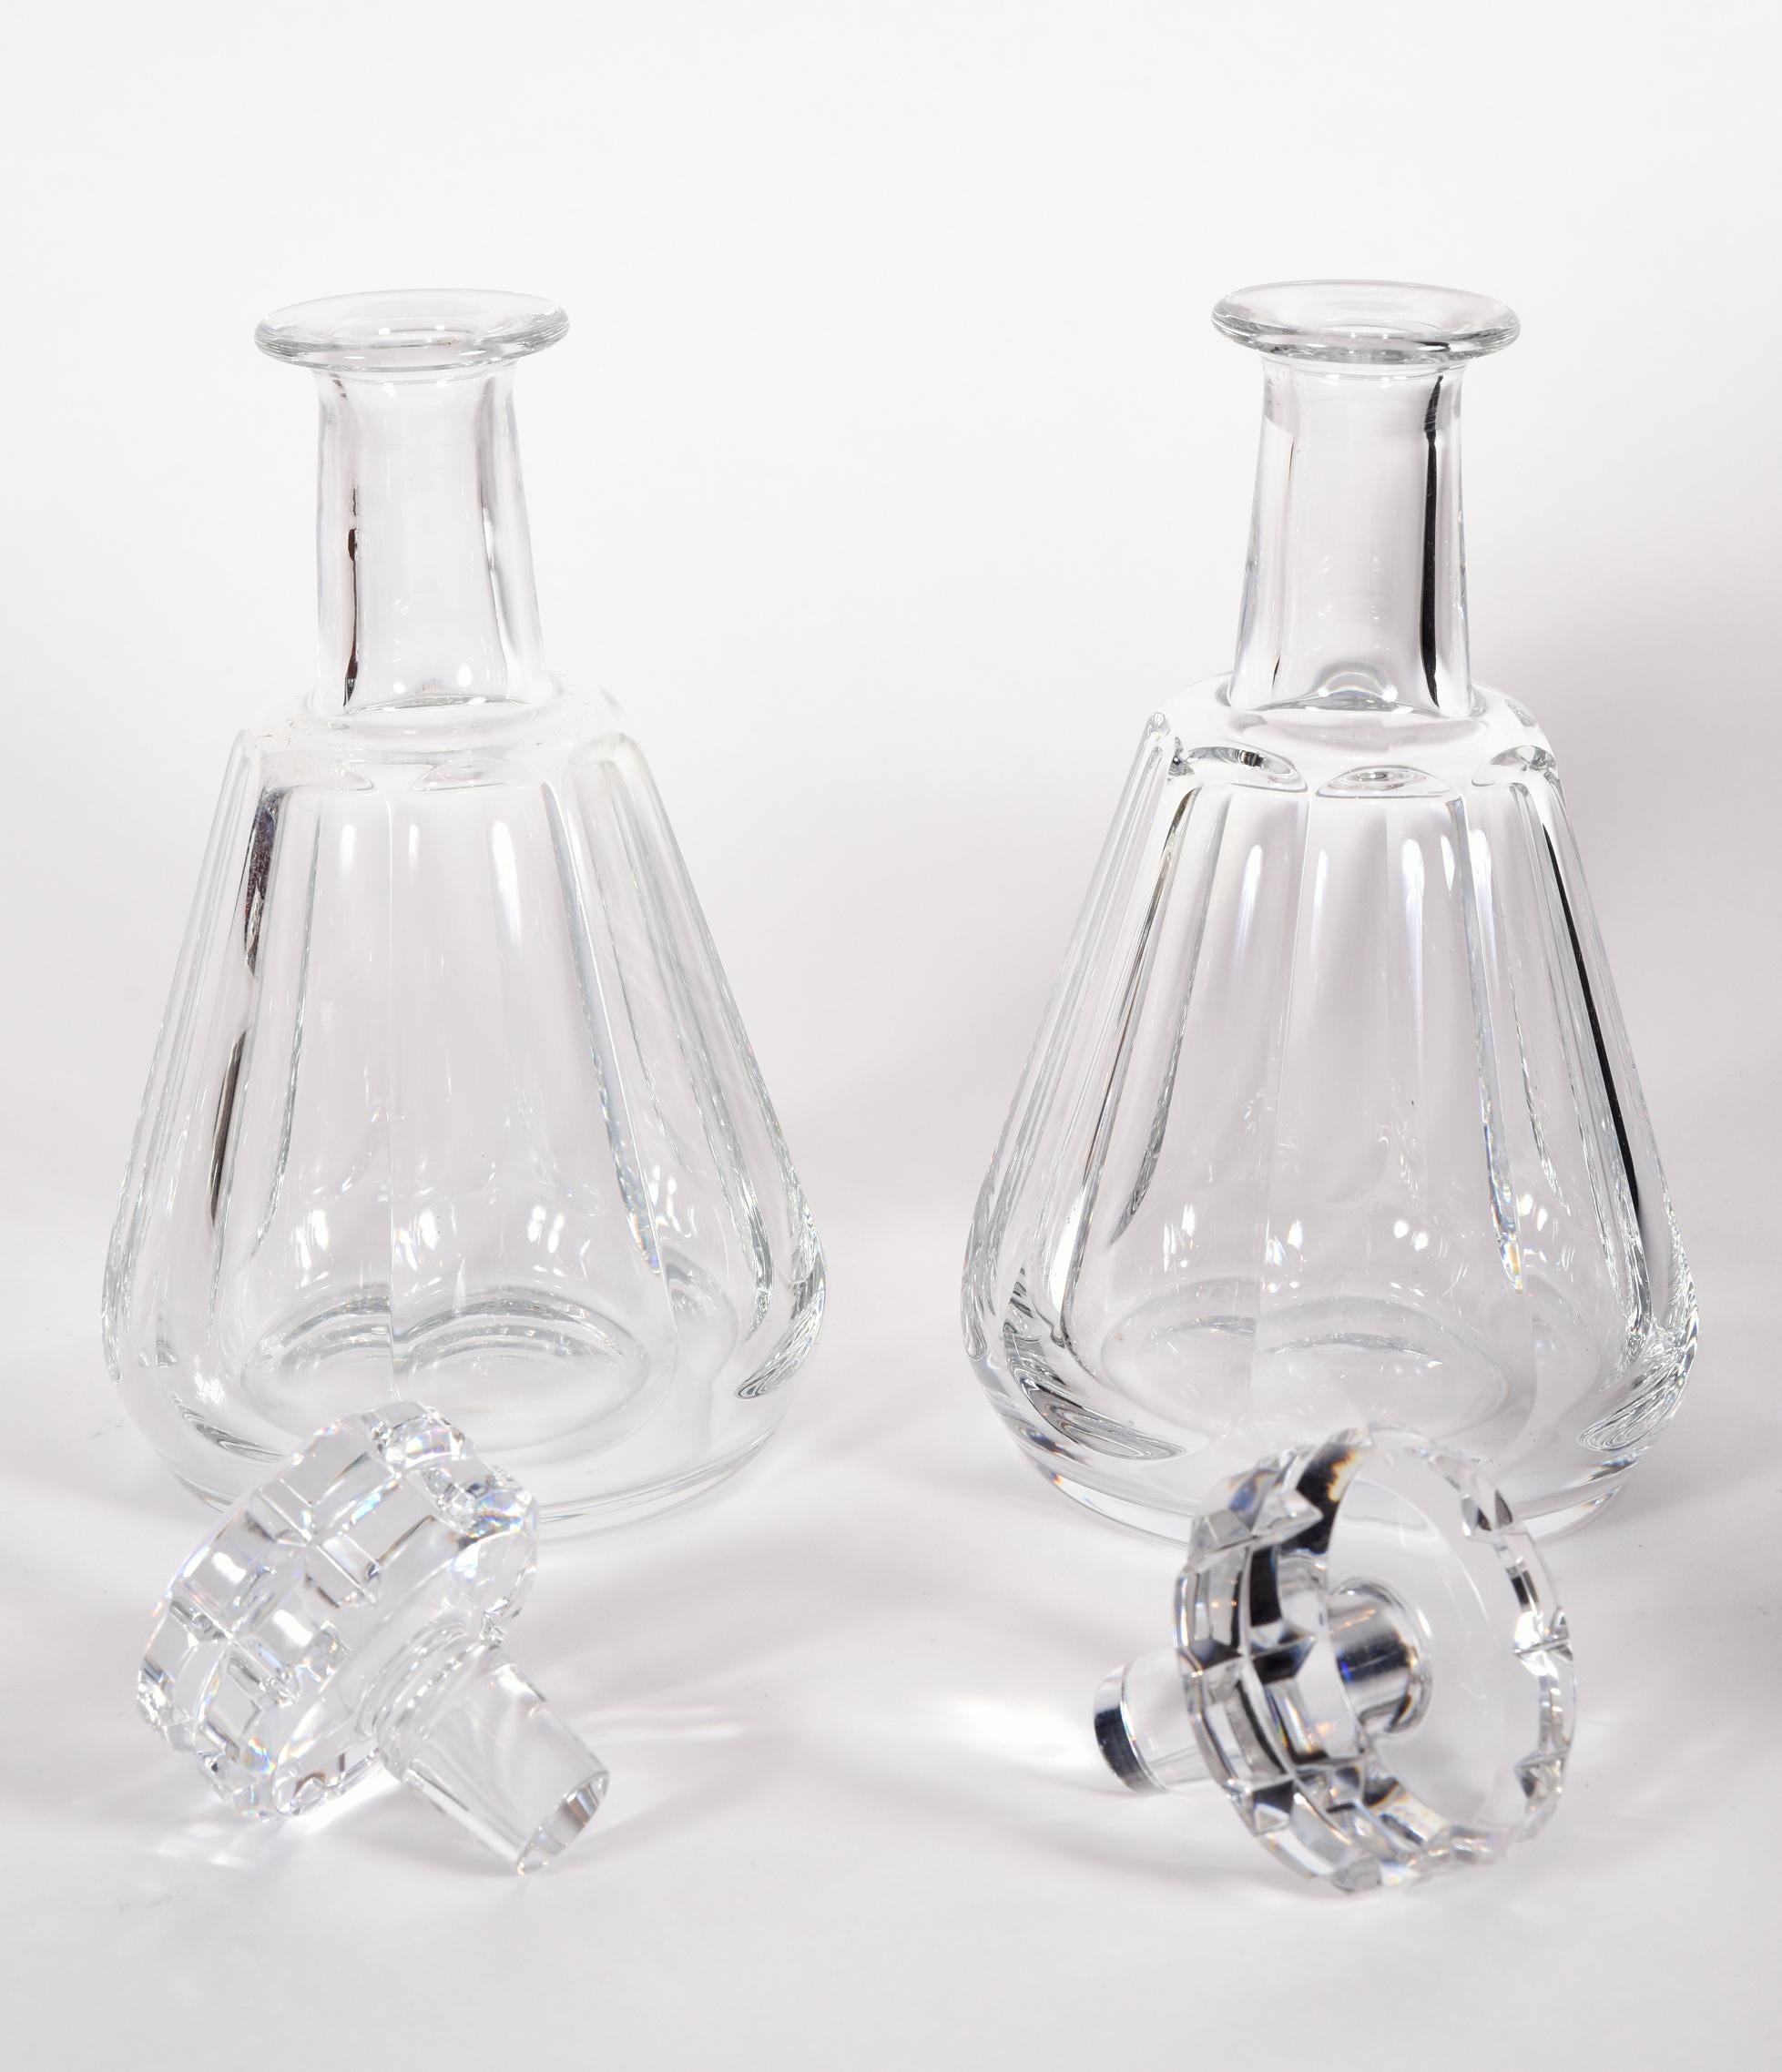 Pair of cut crystal drinks baccarat decanters. These are French mouth blown with hand panel cutting, maker's mark undersigned on each one. The glass is in excellent vintage condition with no breaks or repairs. Each decanter measure about 9.5 inches